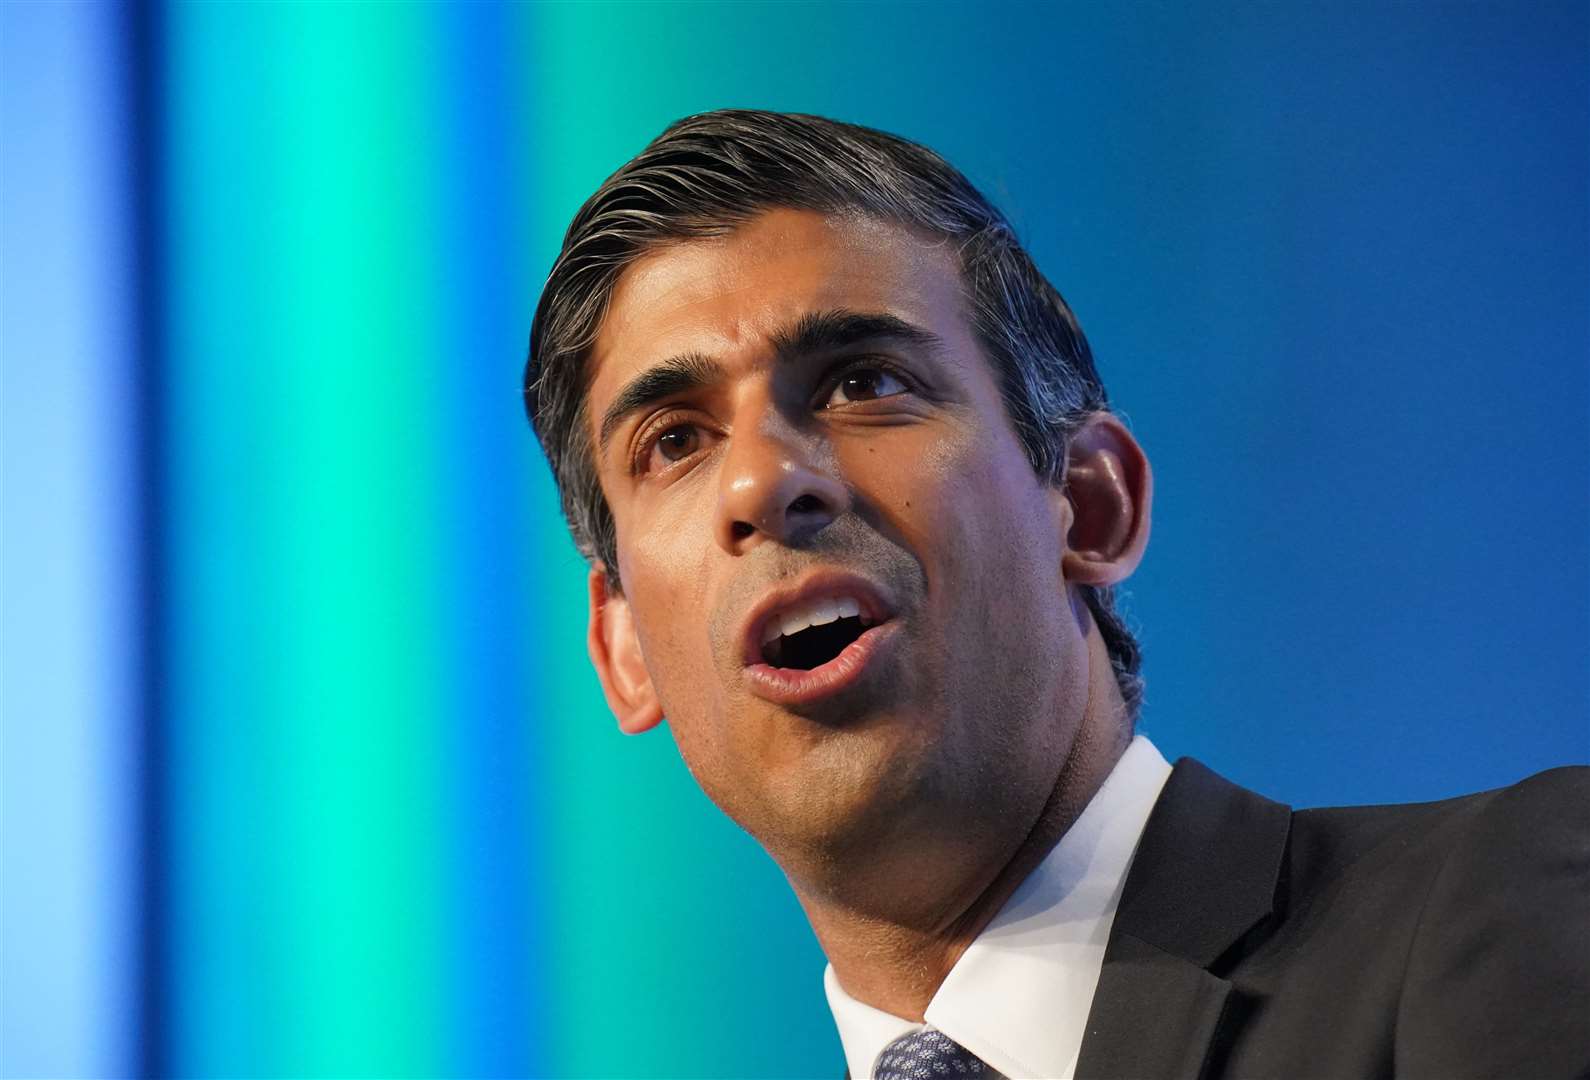 Rishi Sunak told the audience of automotive leaders that the sector is ‘incredibly important to the UK economy’ (PA)